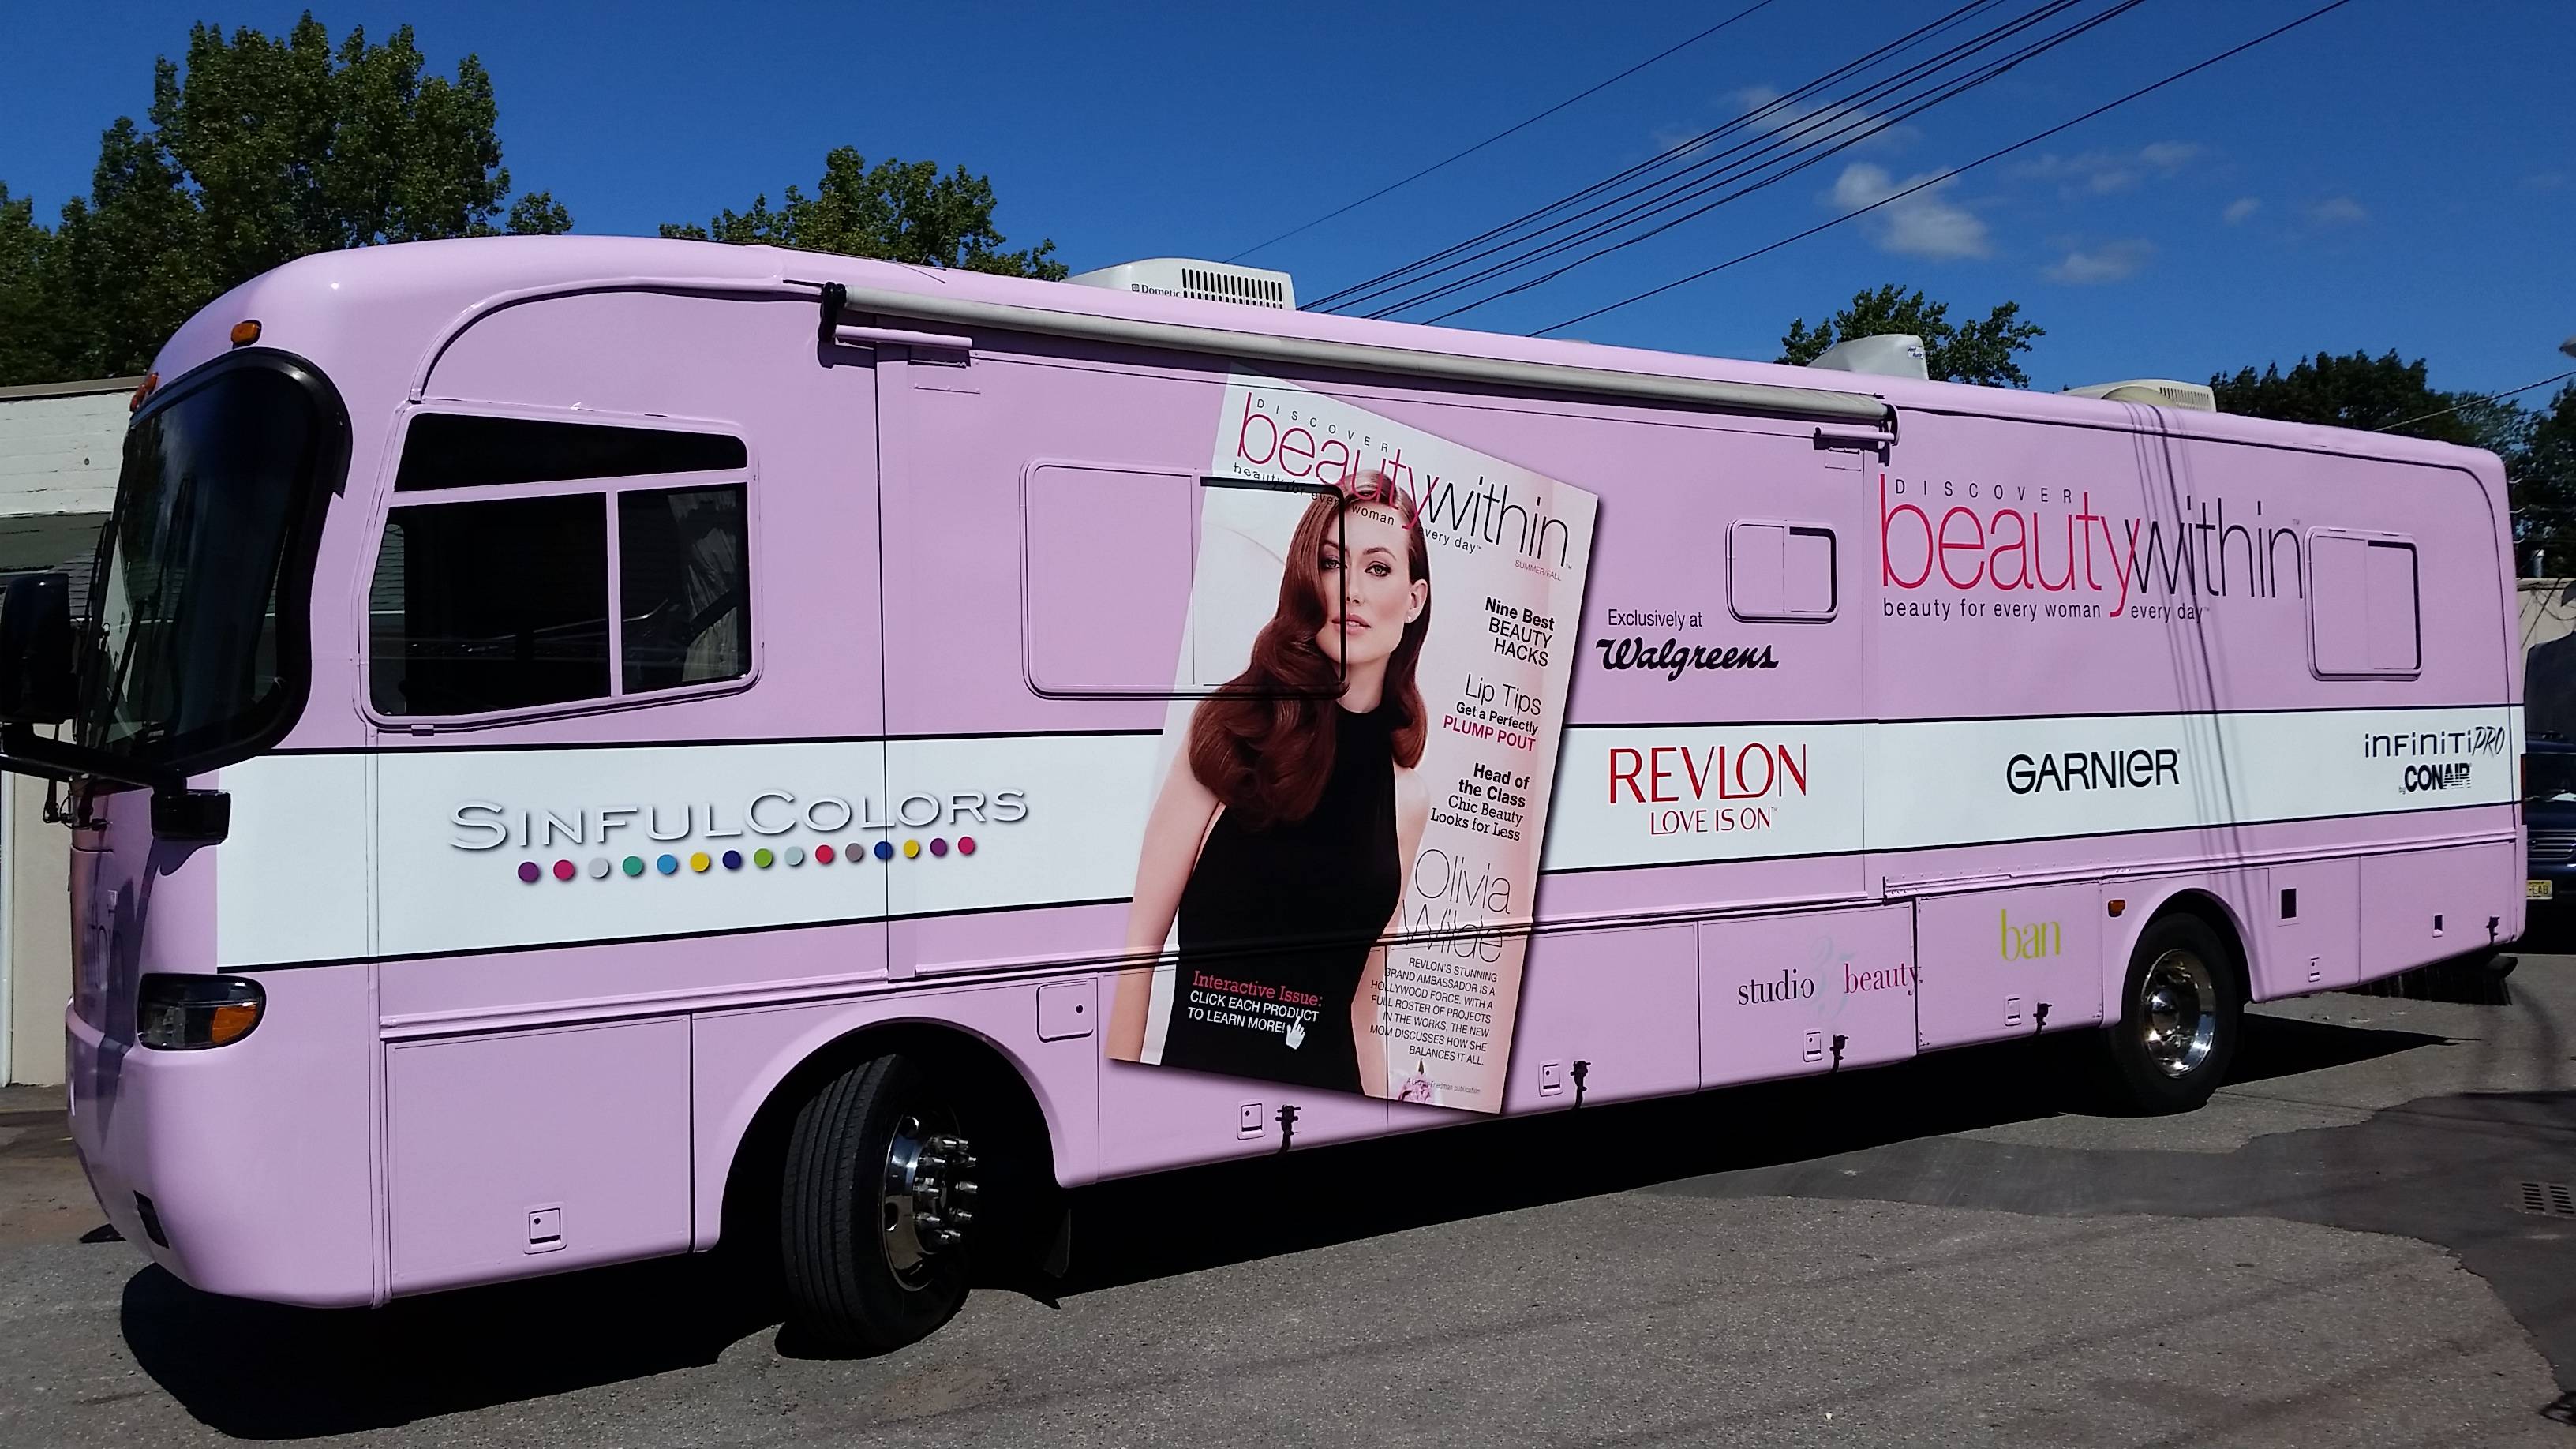 Bus wraps are great way to create a buzz for events, promotions, & trade shows